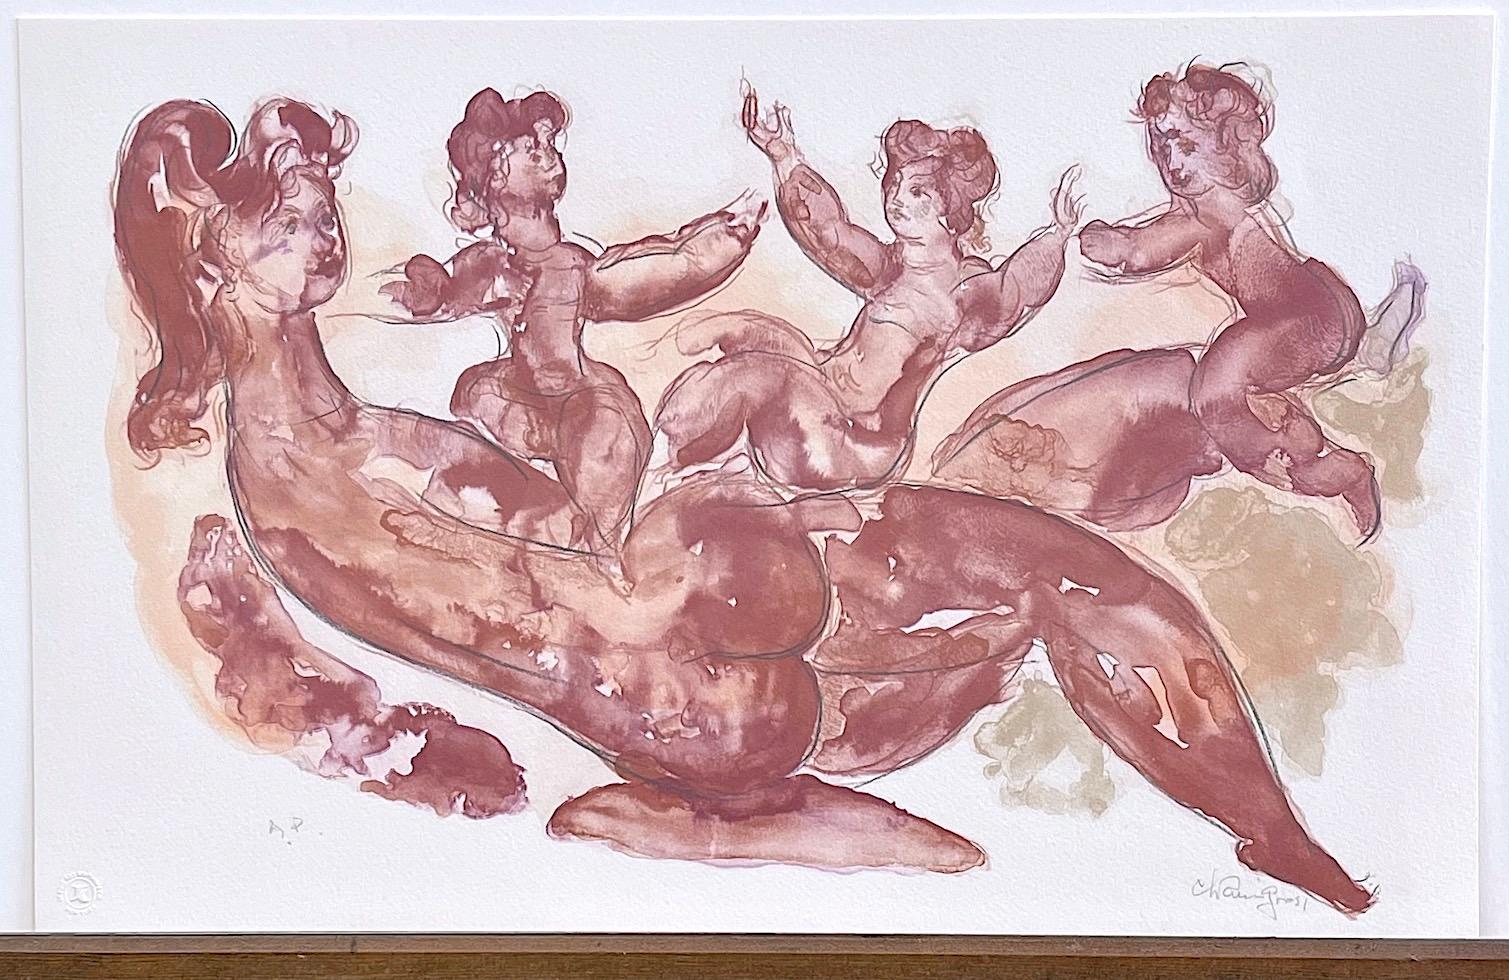 Signierte Lithographie „MOTHER AND CHILDREN PLAYING“, Mutter mit Tochter, Aquarell (Beige), Nude Print, von Chaim Gross